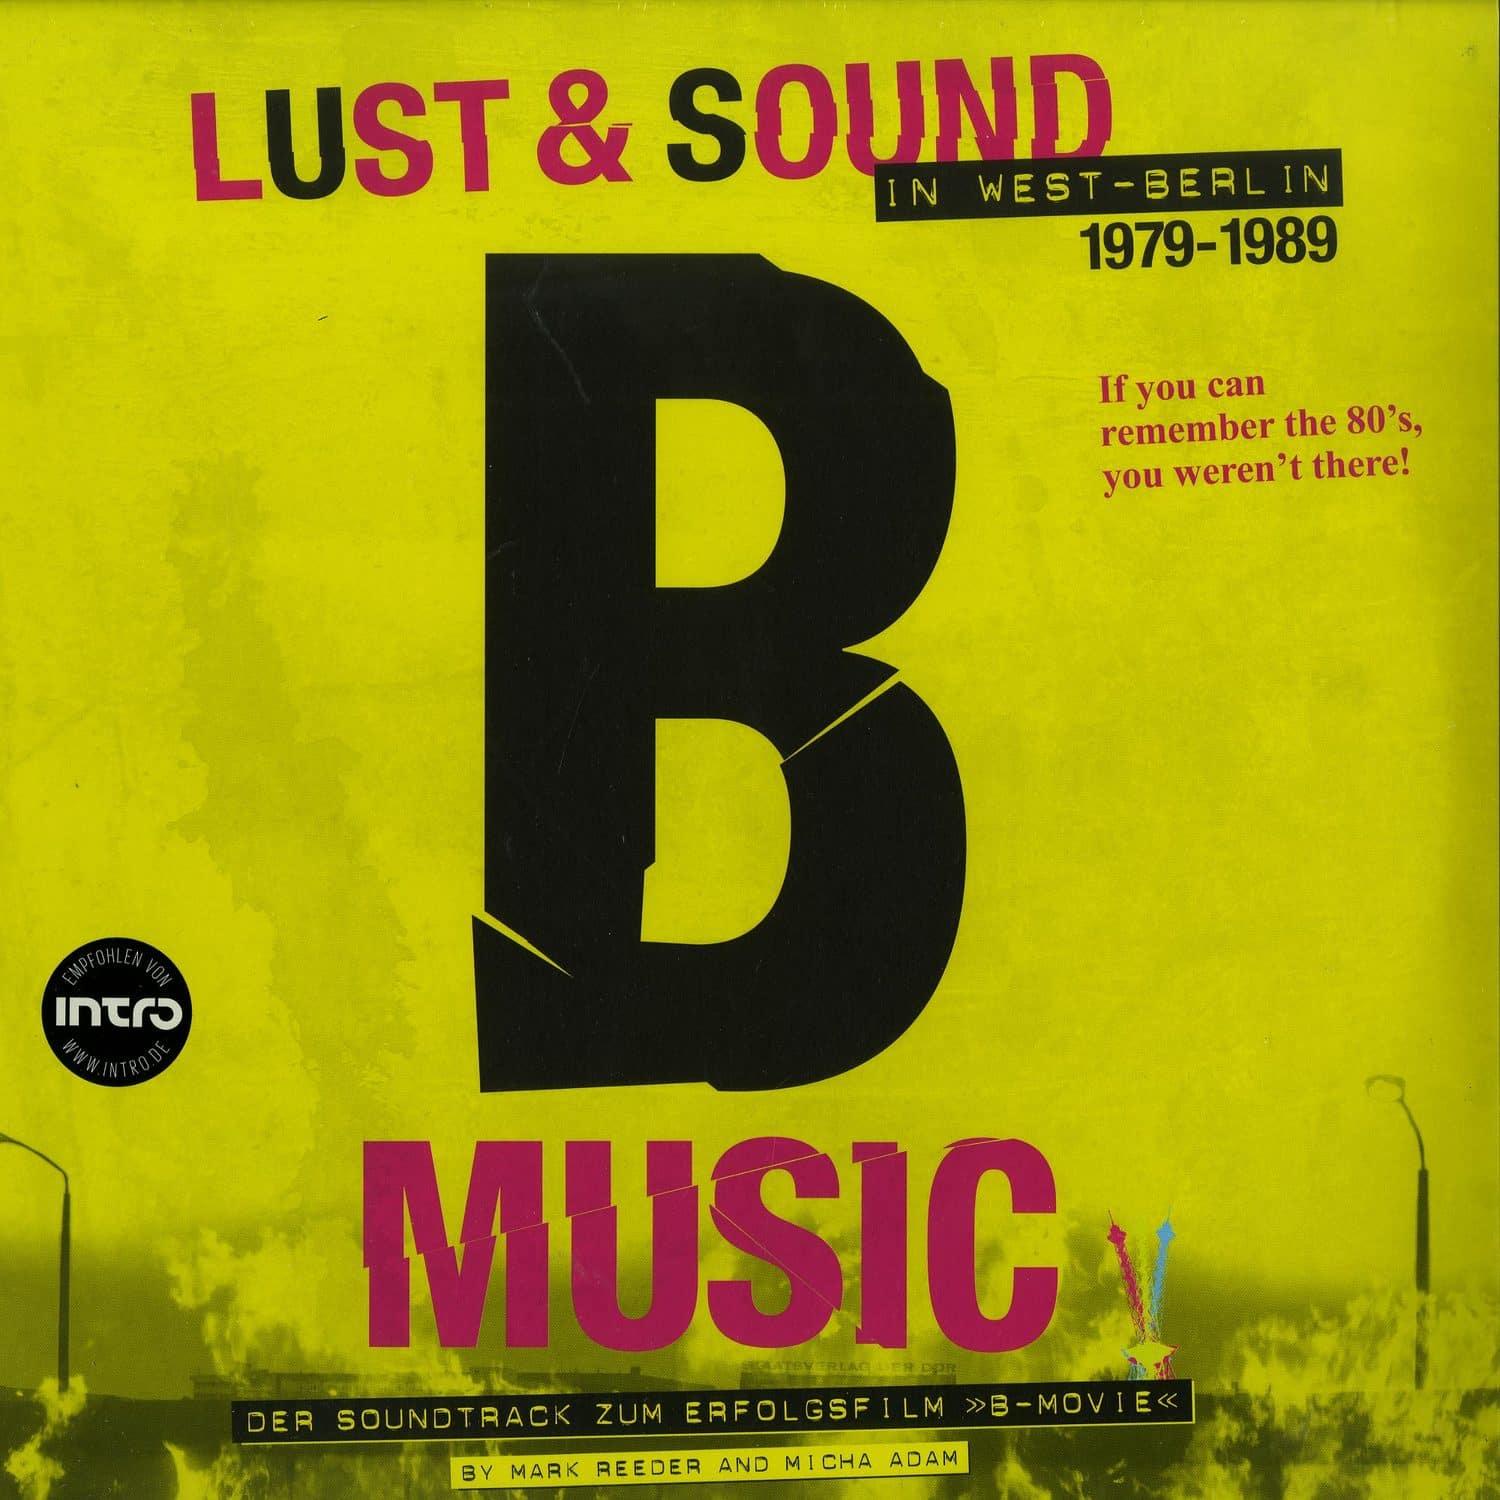 Various Artists - B-MOVIE - LUST & SOUND IN WEST BERLIN 1979-1989 O.S.T. 